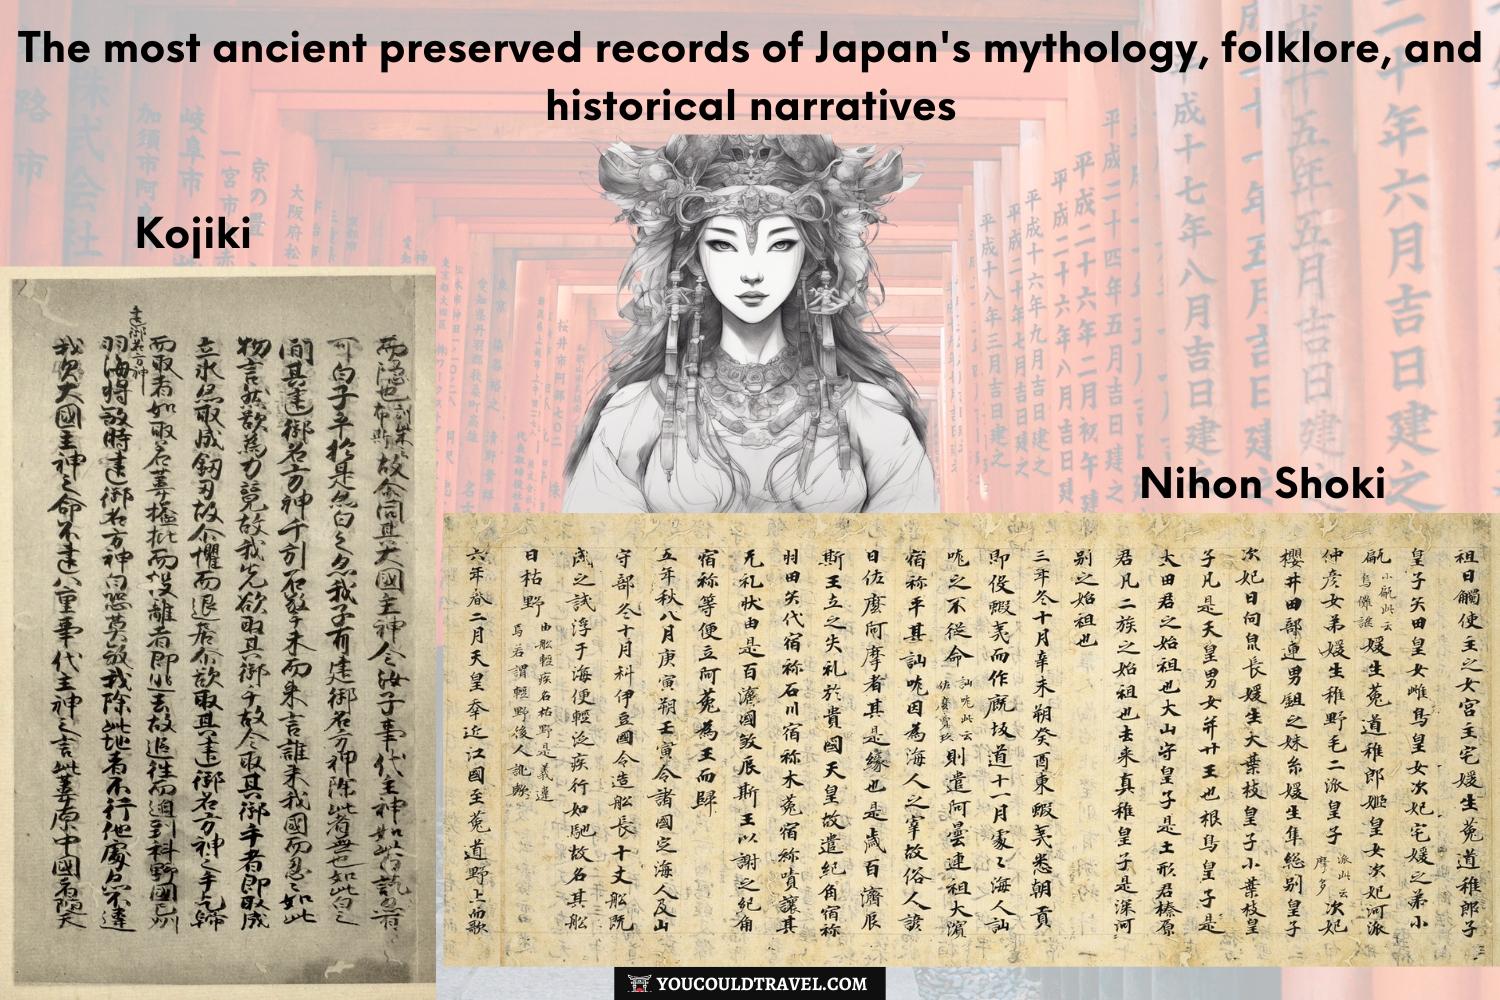 Japanese legends and important pages from Kojiki and Nihon Shoki